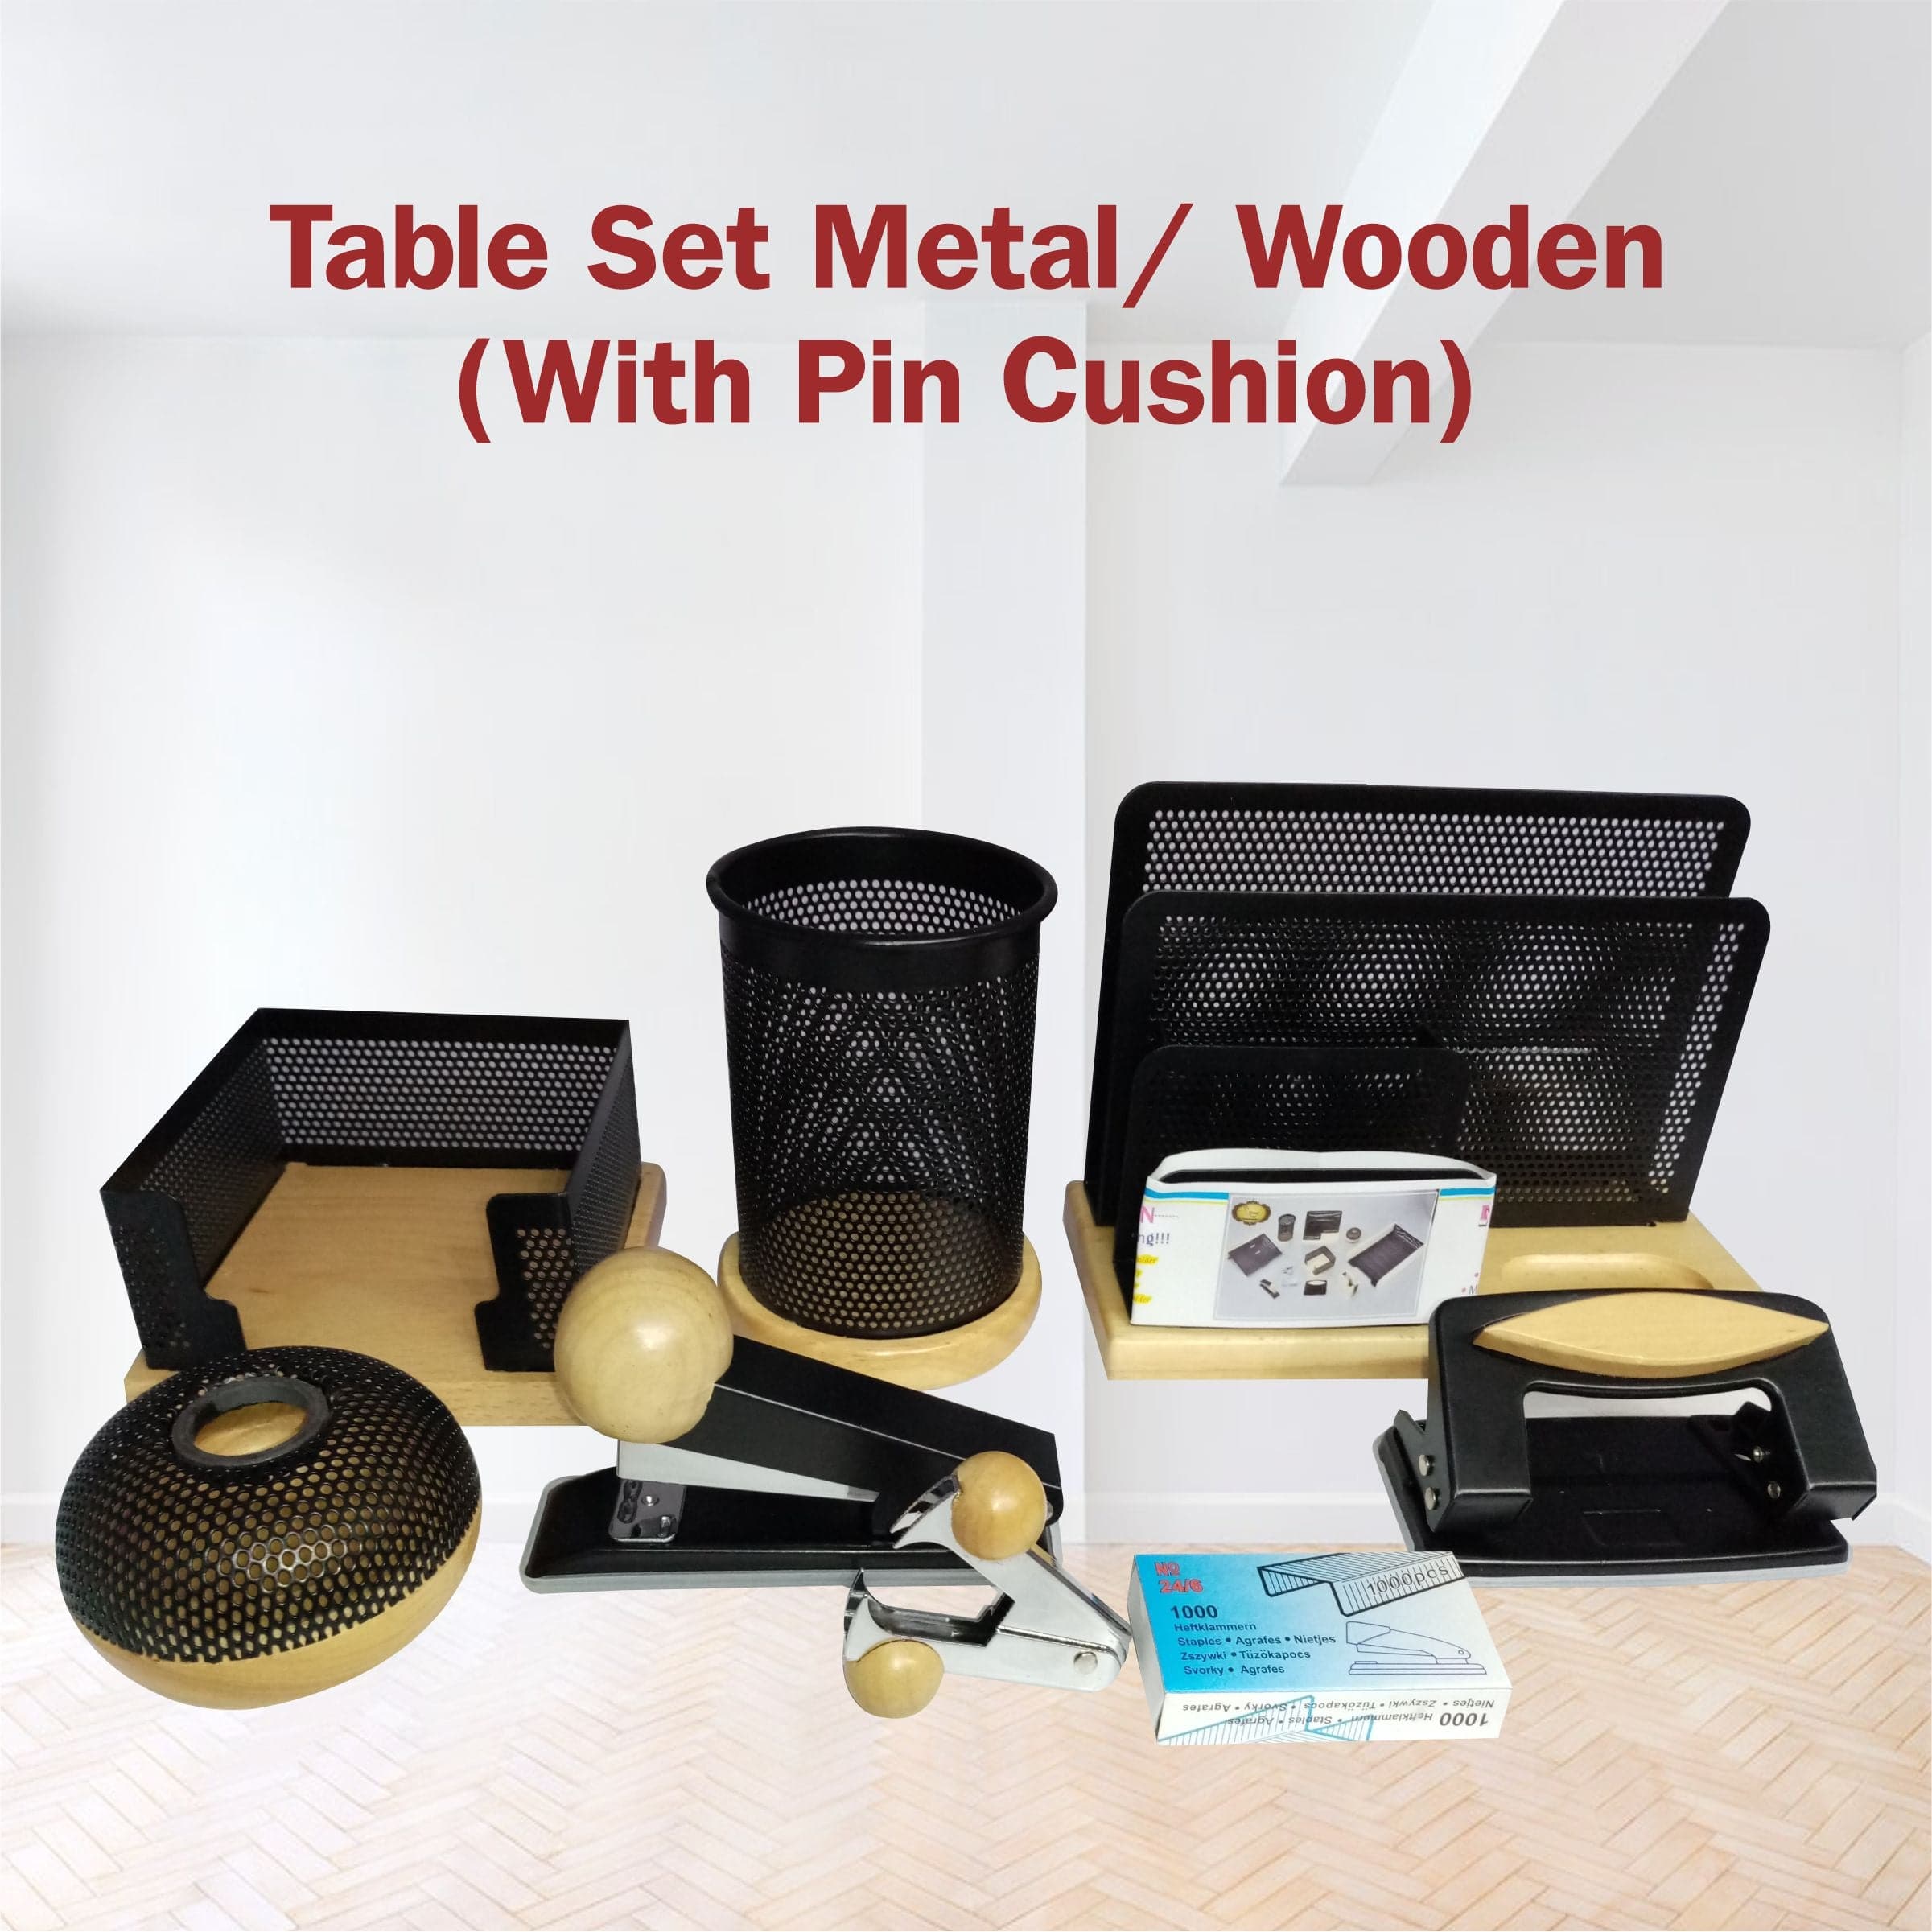 Table Set Metal/ Wooden (With Pin Cushion)